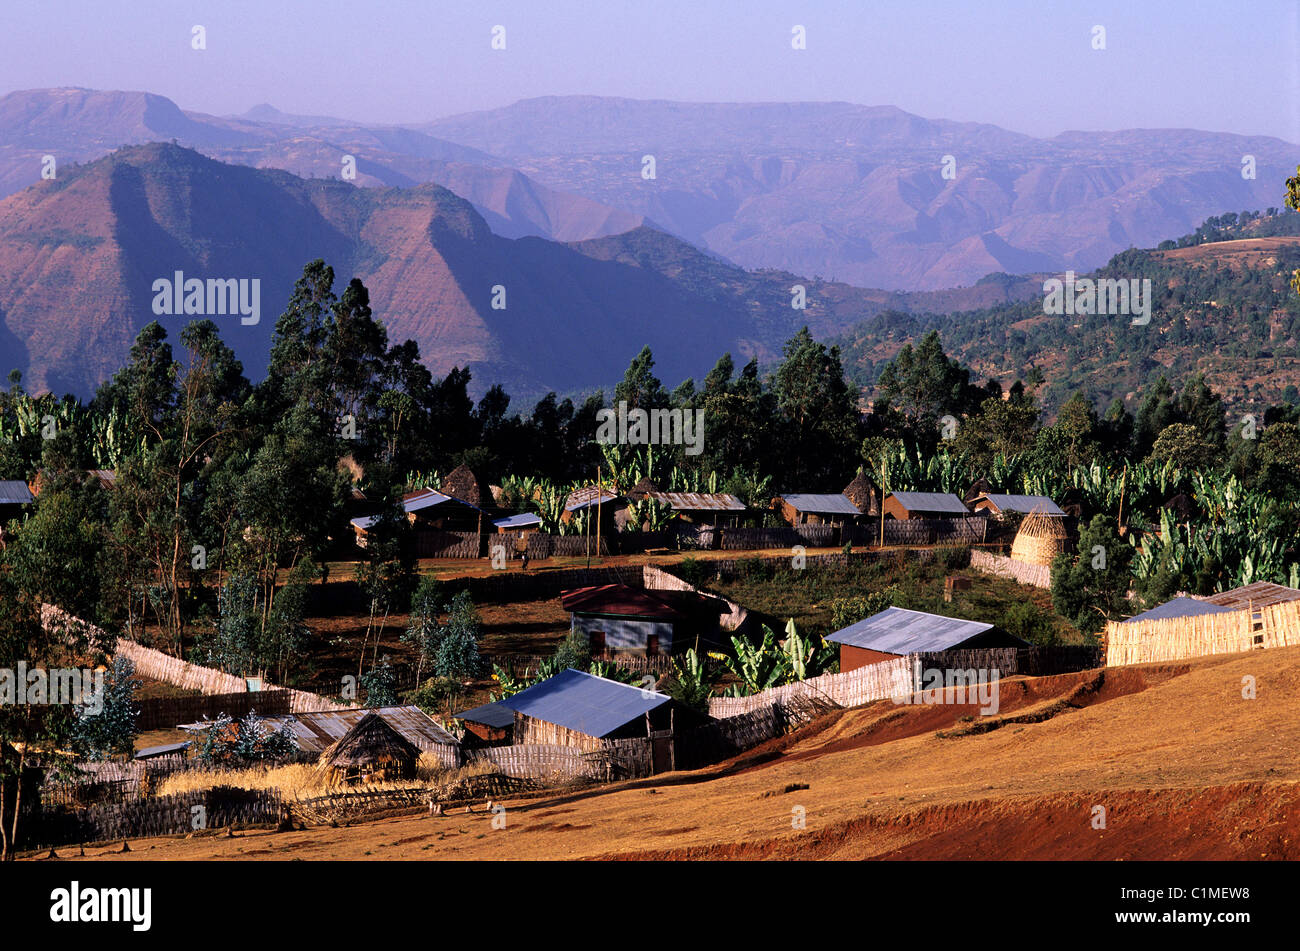 Ethiopia, the Rift valley, the village of Dorze in the Guge Mountains Stock Photo